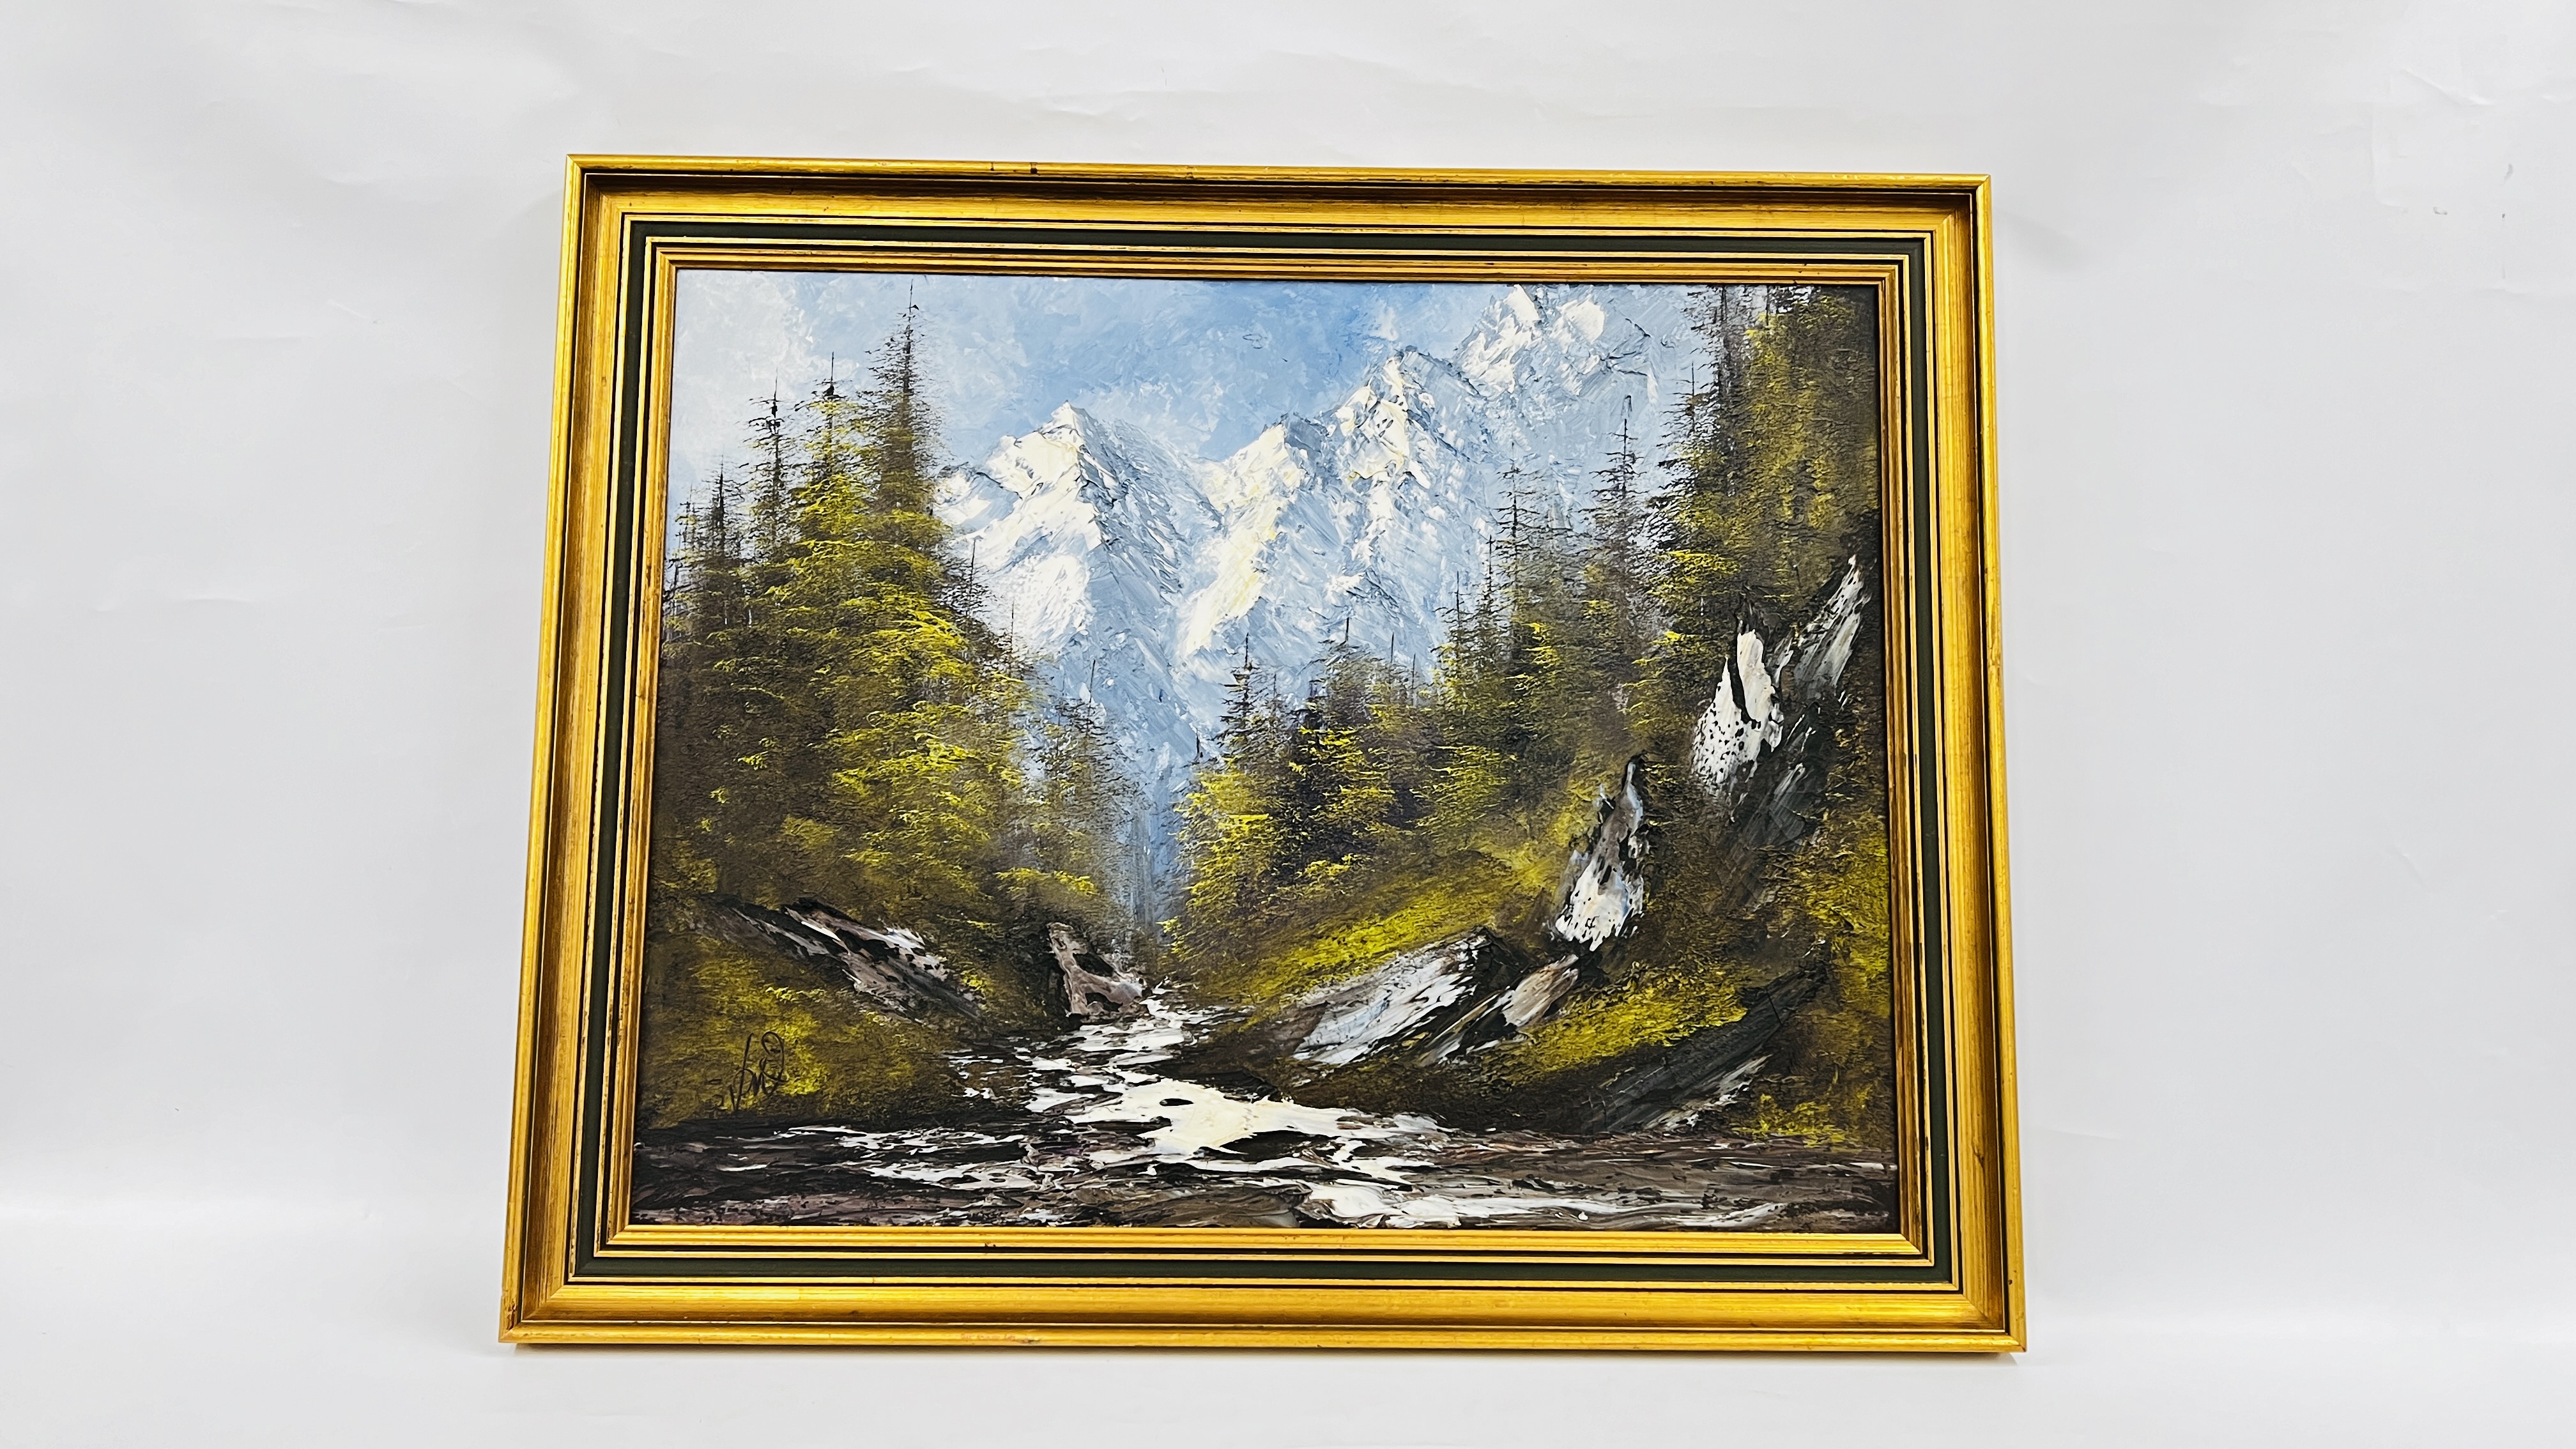 OIL ON CANVAS OF ALPINE RIVER MOUNTAIN SCENE BEARING SIGNATURE TERRY EVANS 70CM X 90CM. - Image 7 of 7